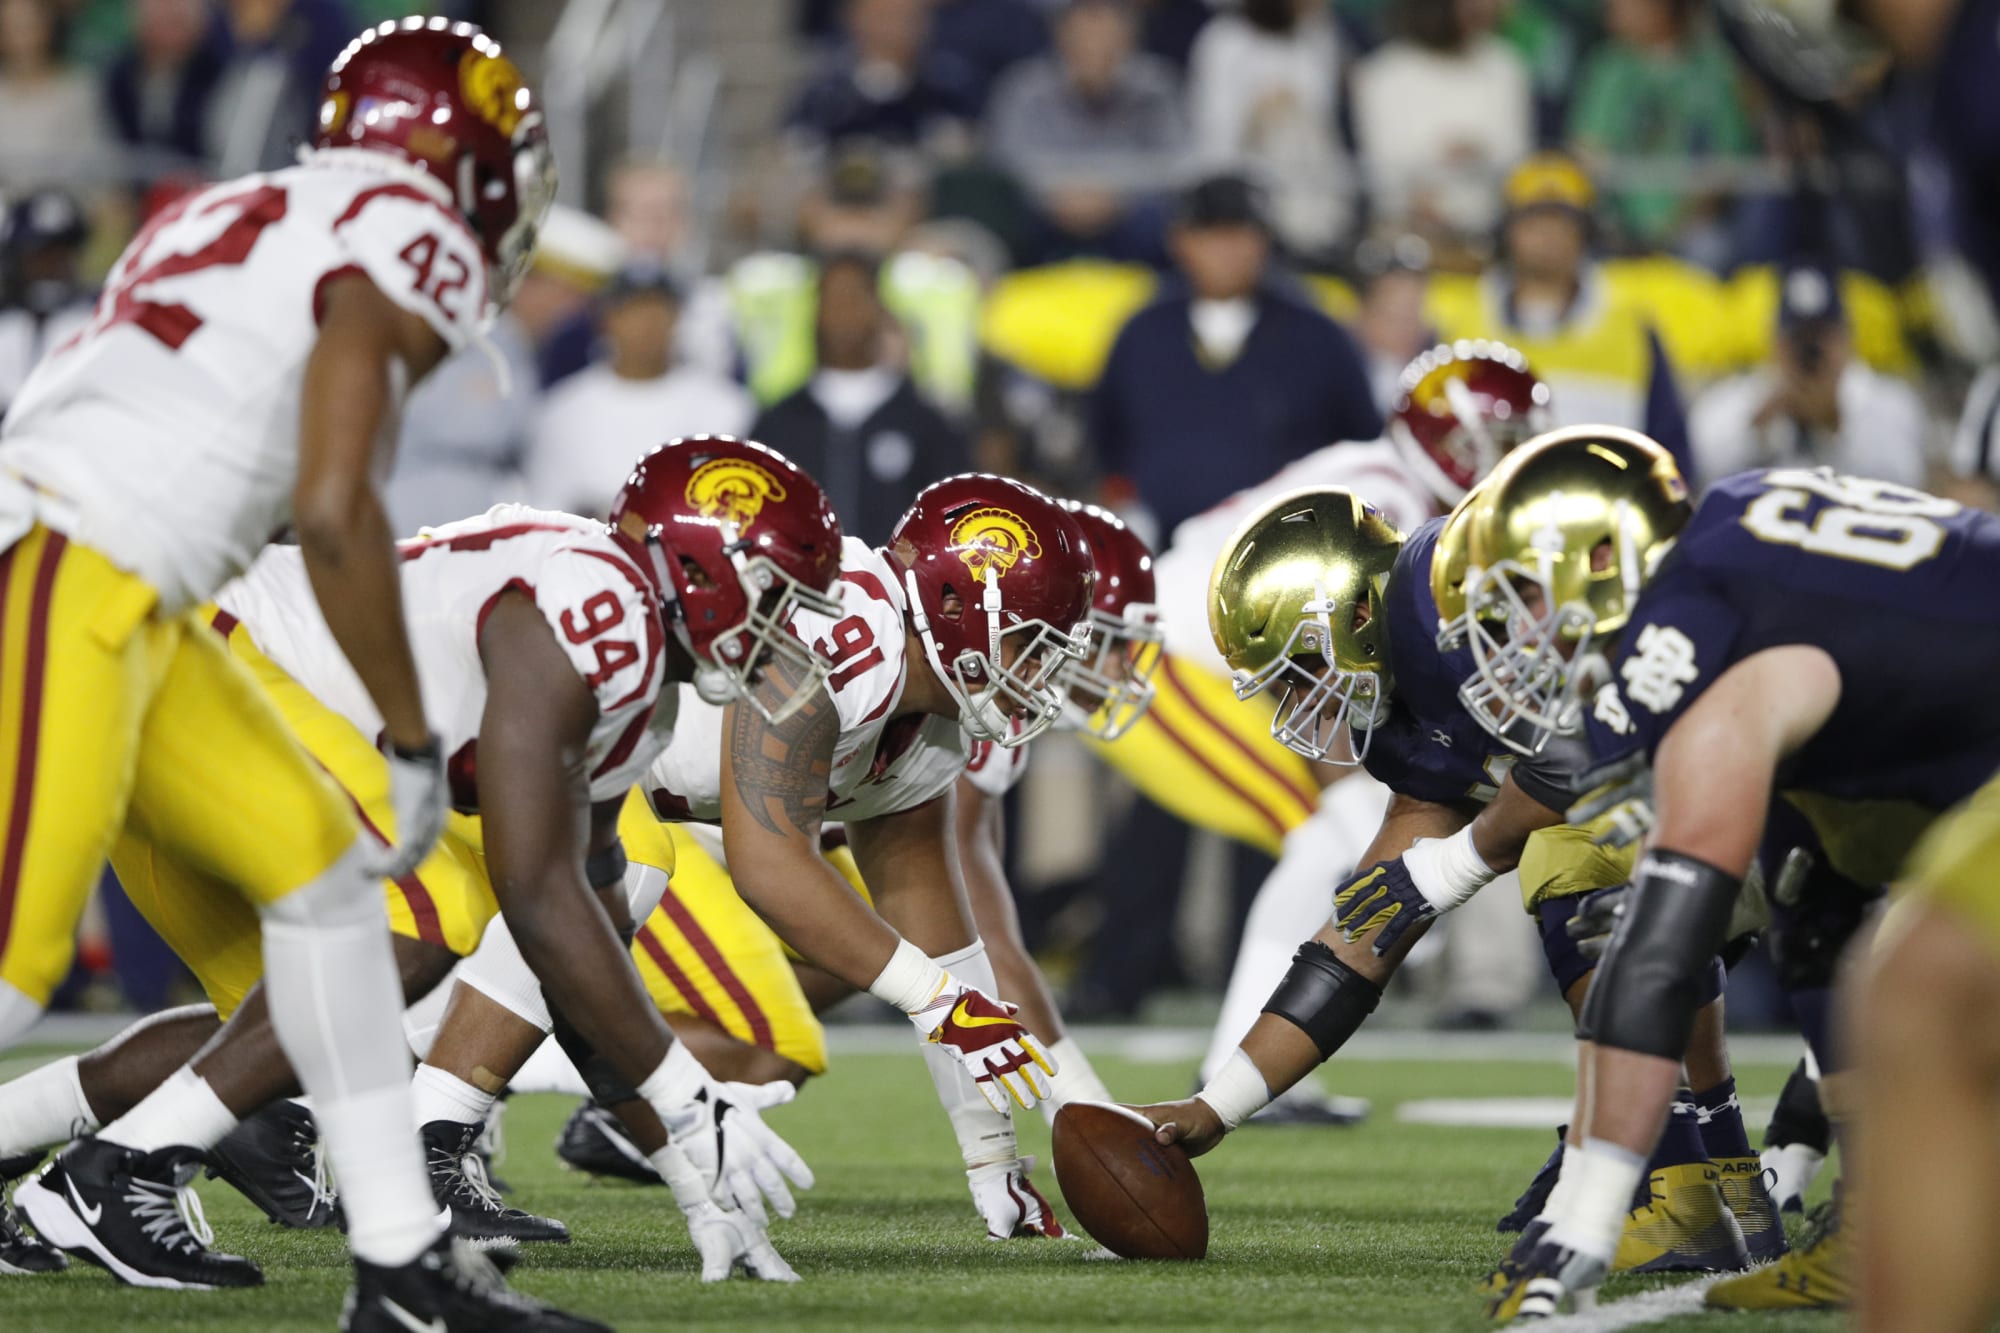 5 biggest perennially overrated college football teams